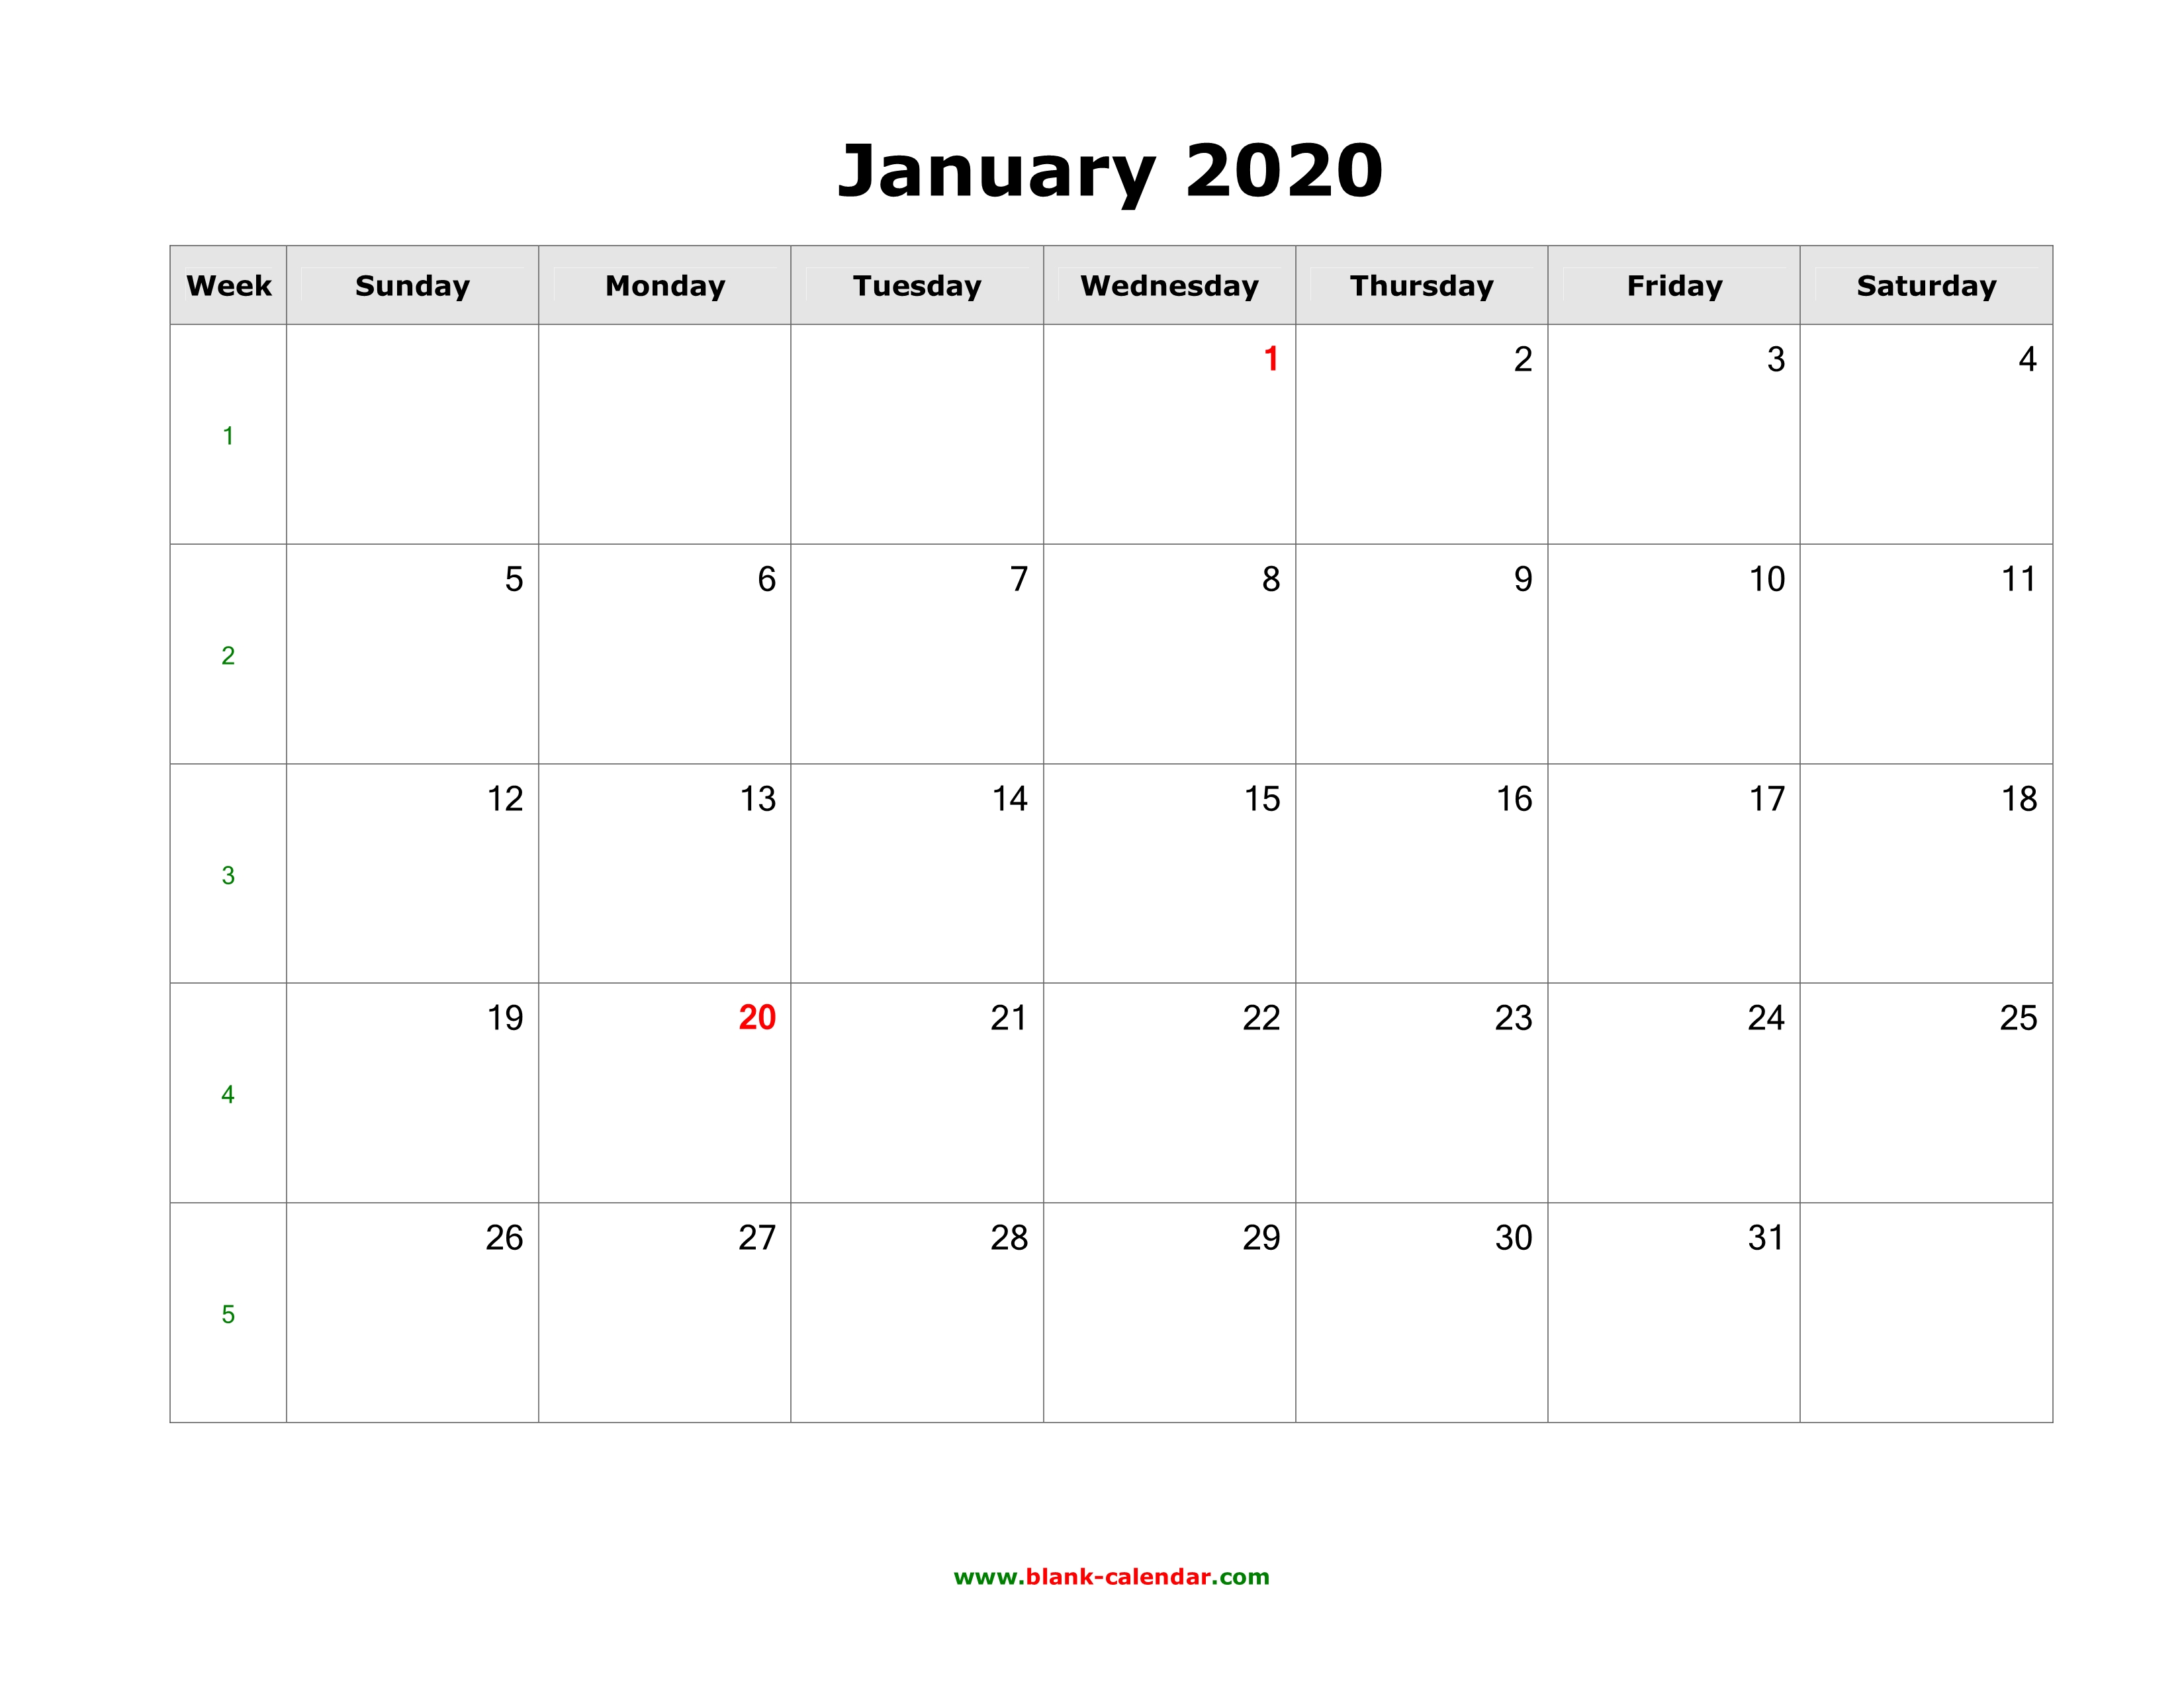 download-blank-calendar-2020-12-pages-one-month-per-page-horizontal